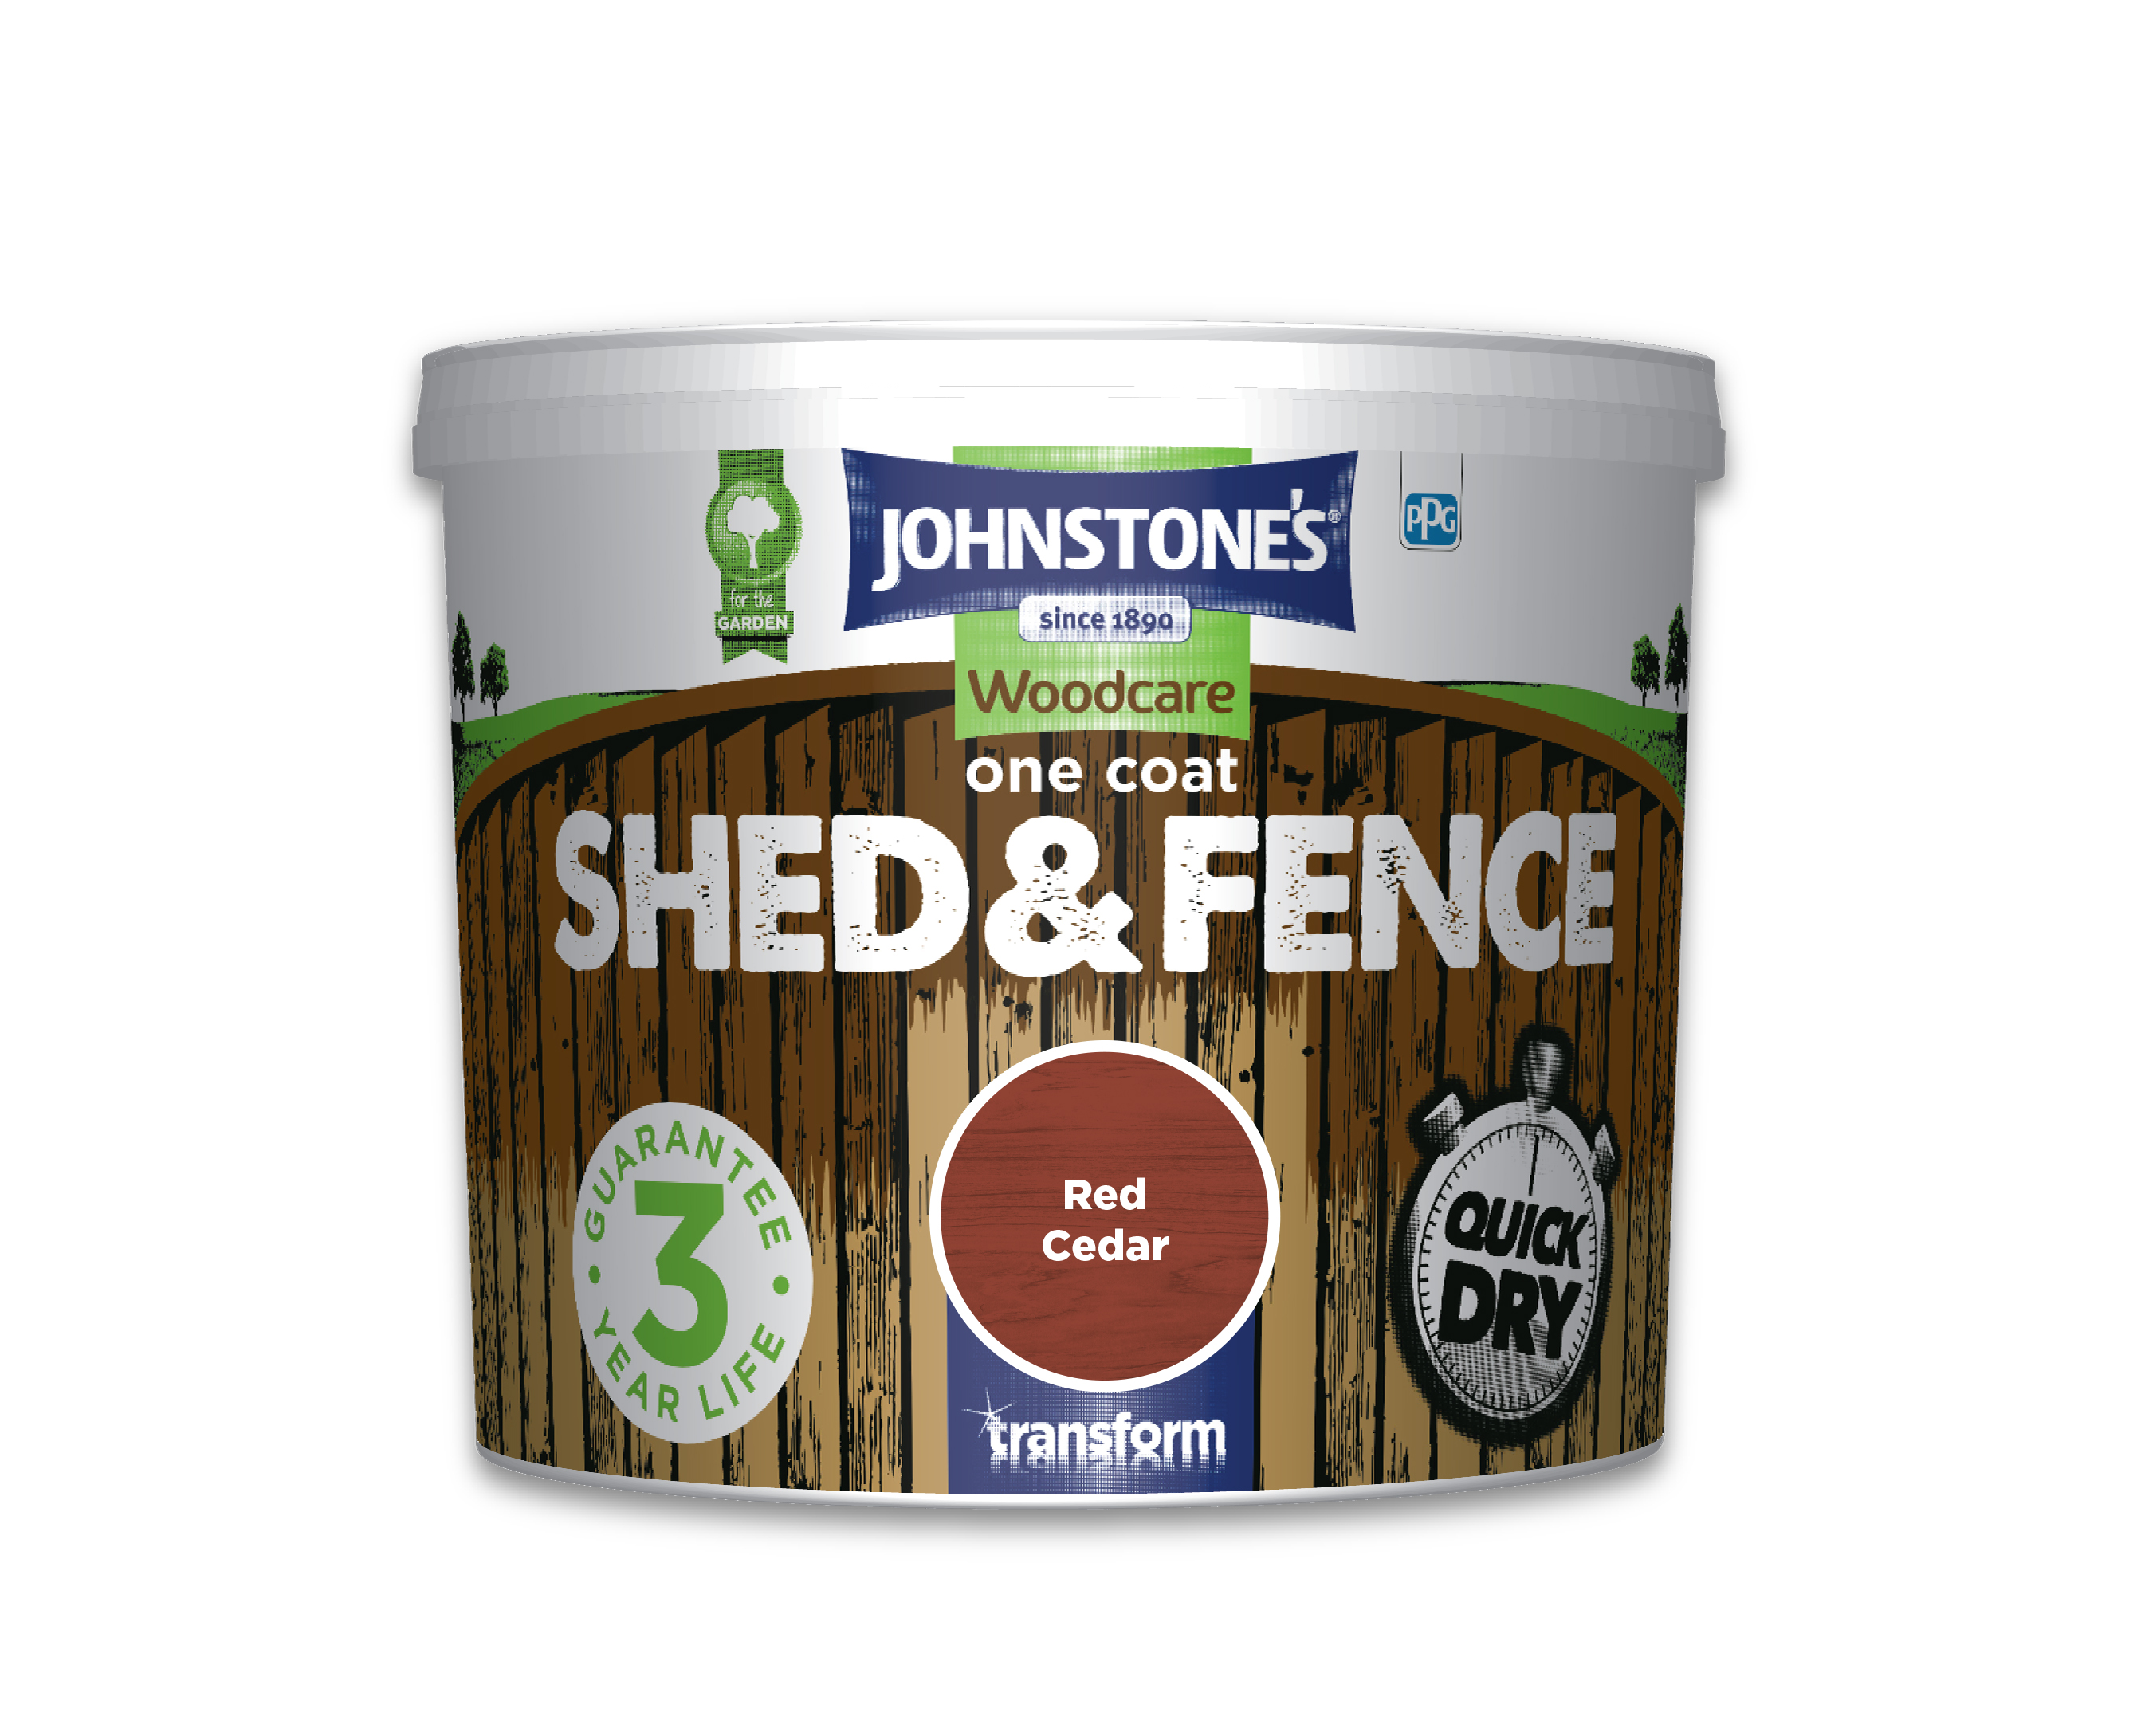 5ltr - Johnstone's Woodcare One Coat Shed & Fence Red Cedar